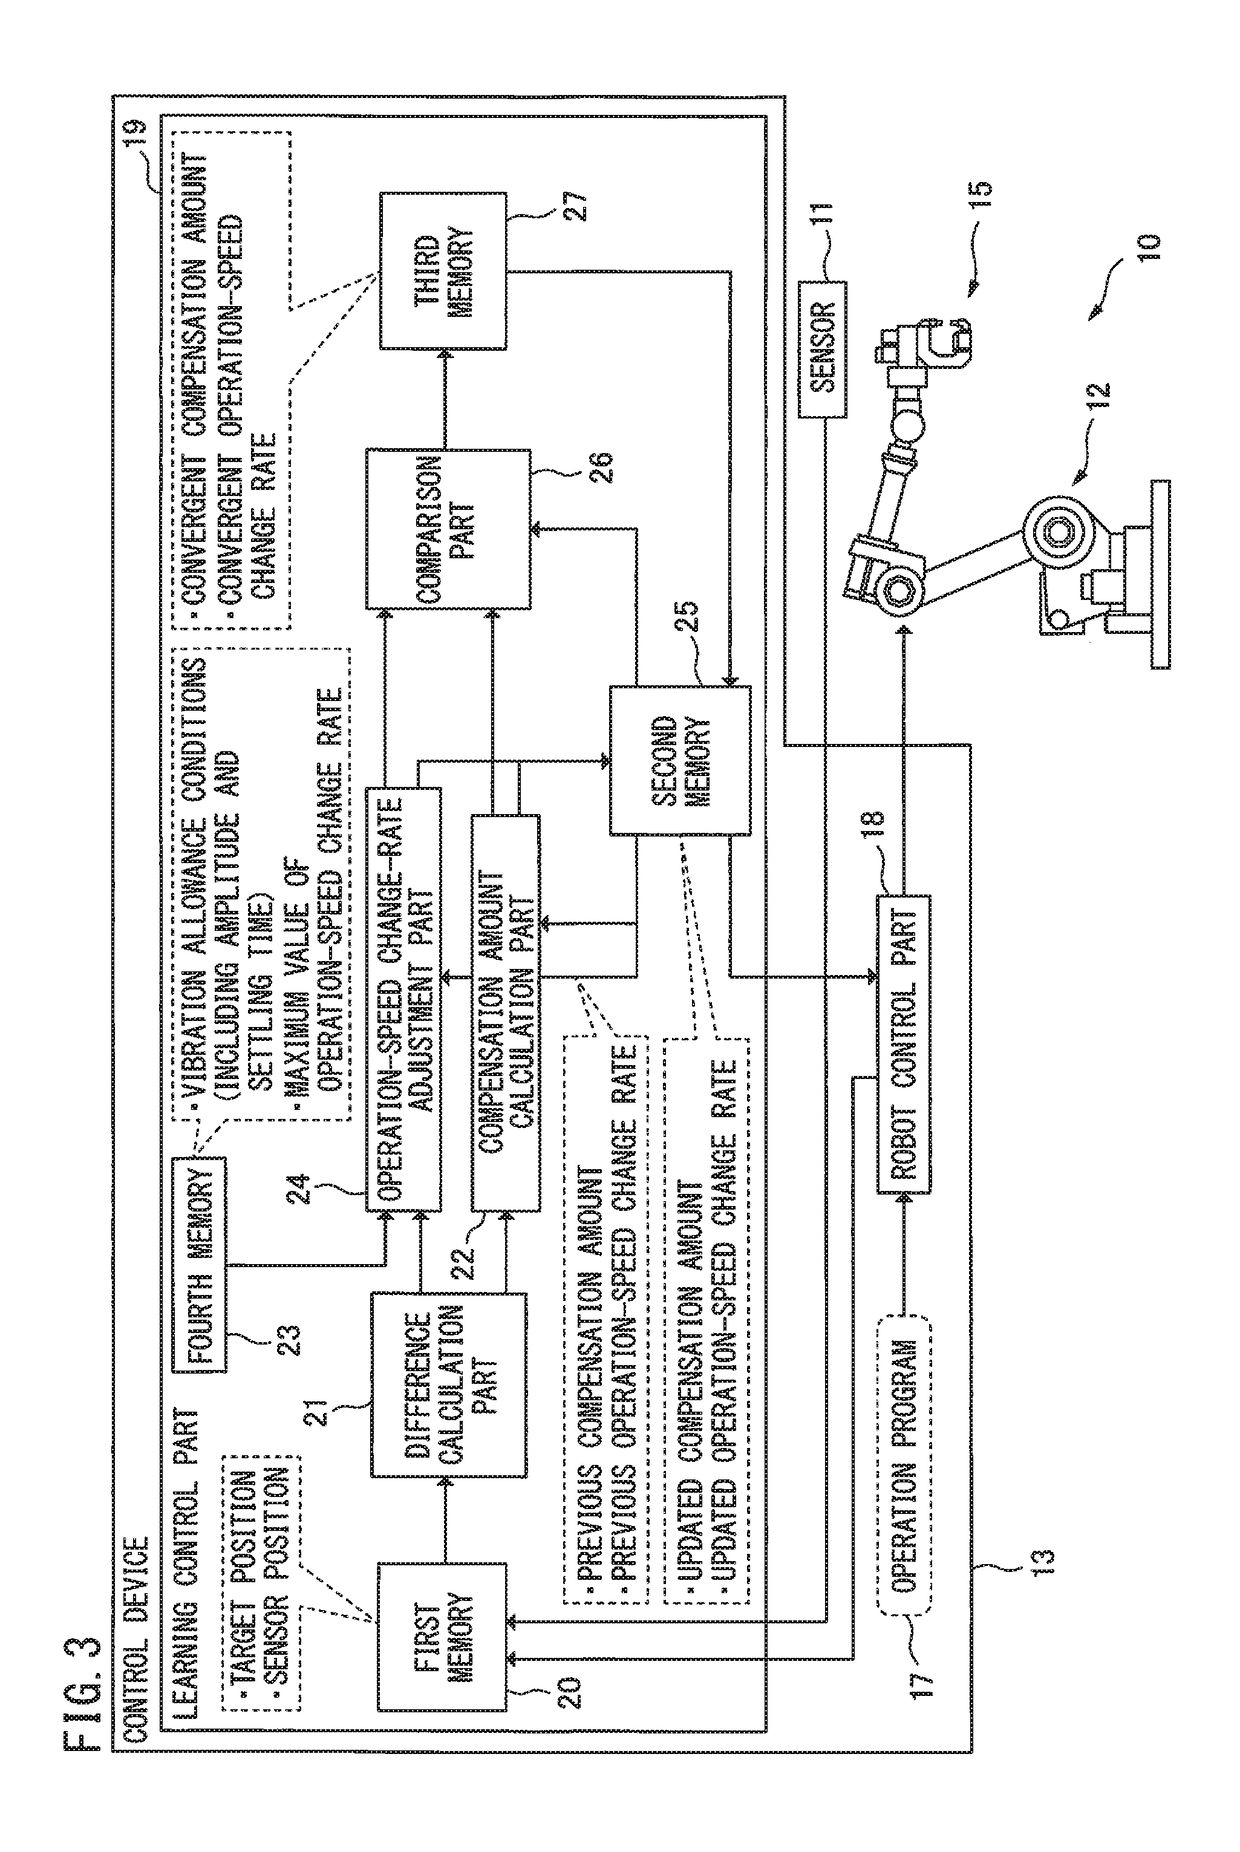 Robot for controlling learning in view of operation in production line, and method of controlling the same